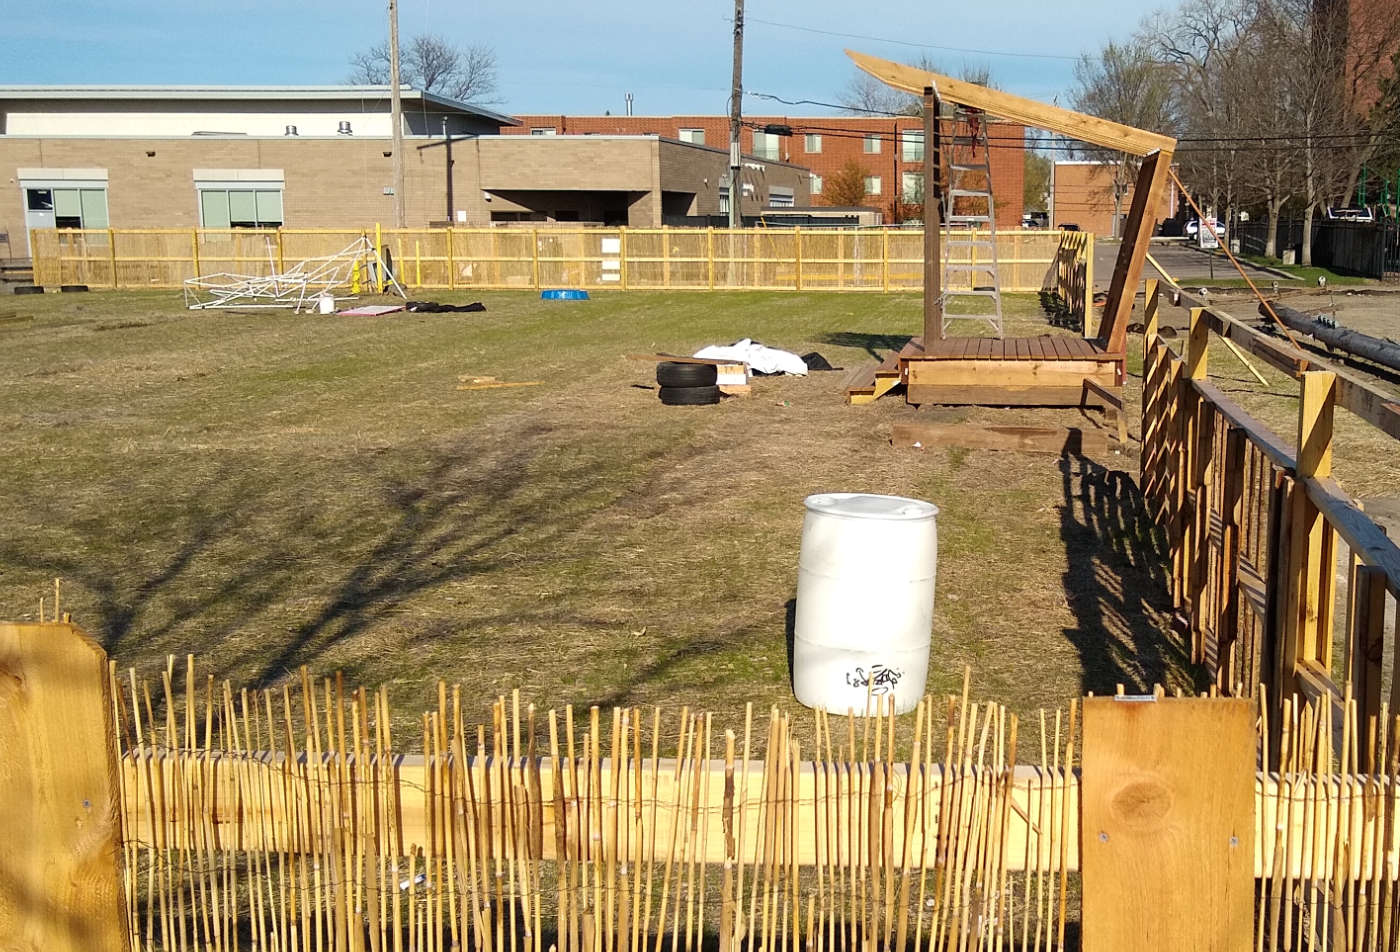 Looking over a wooden fence with cane sticks into an empty lot with a small wooden stage structure and a white barrel in foreground and other odd items on ground in distance